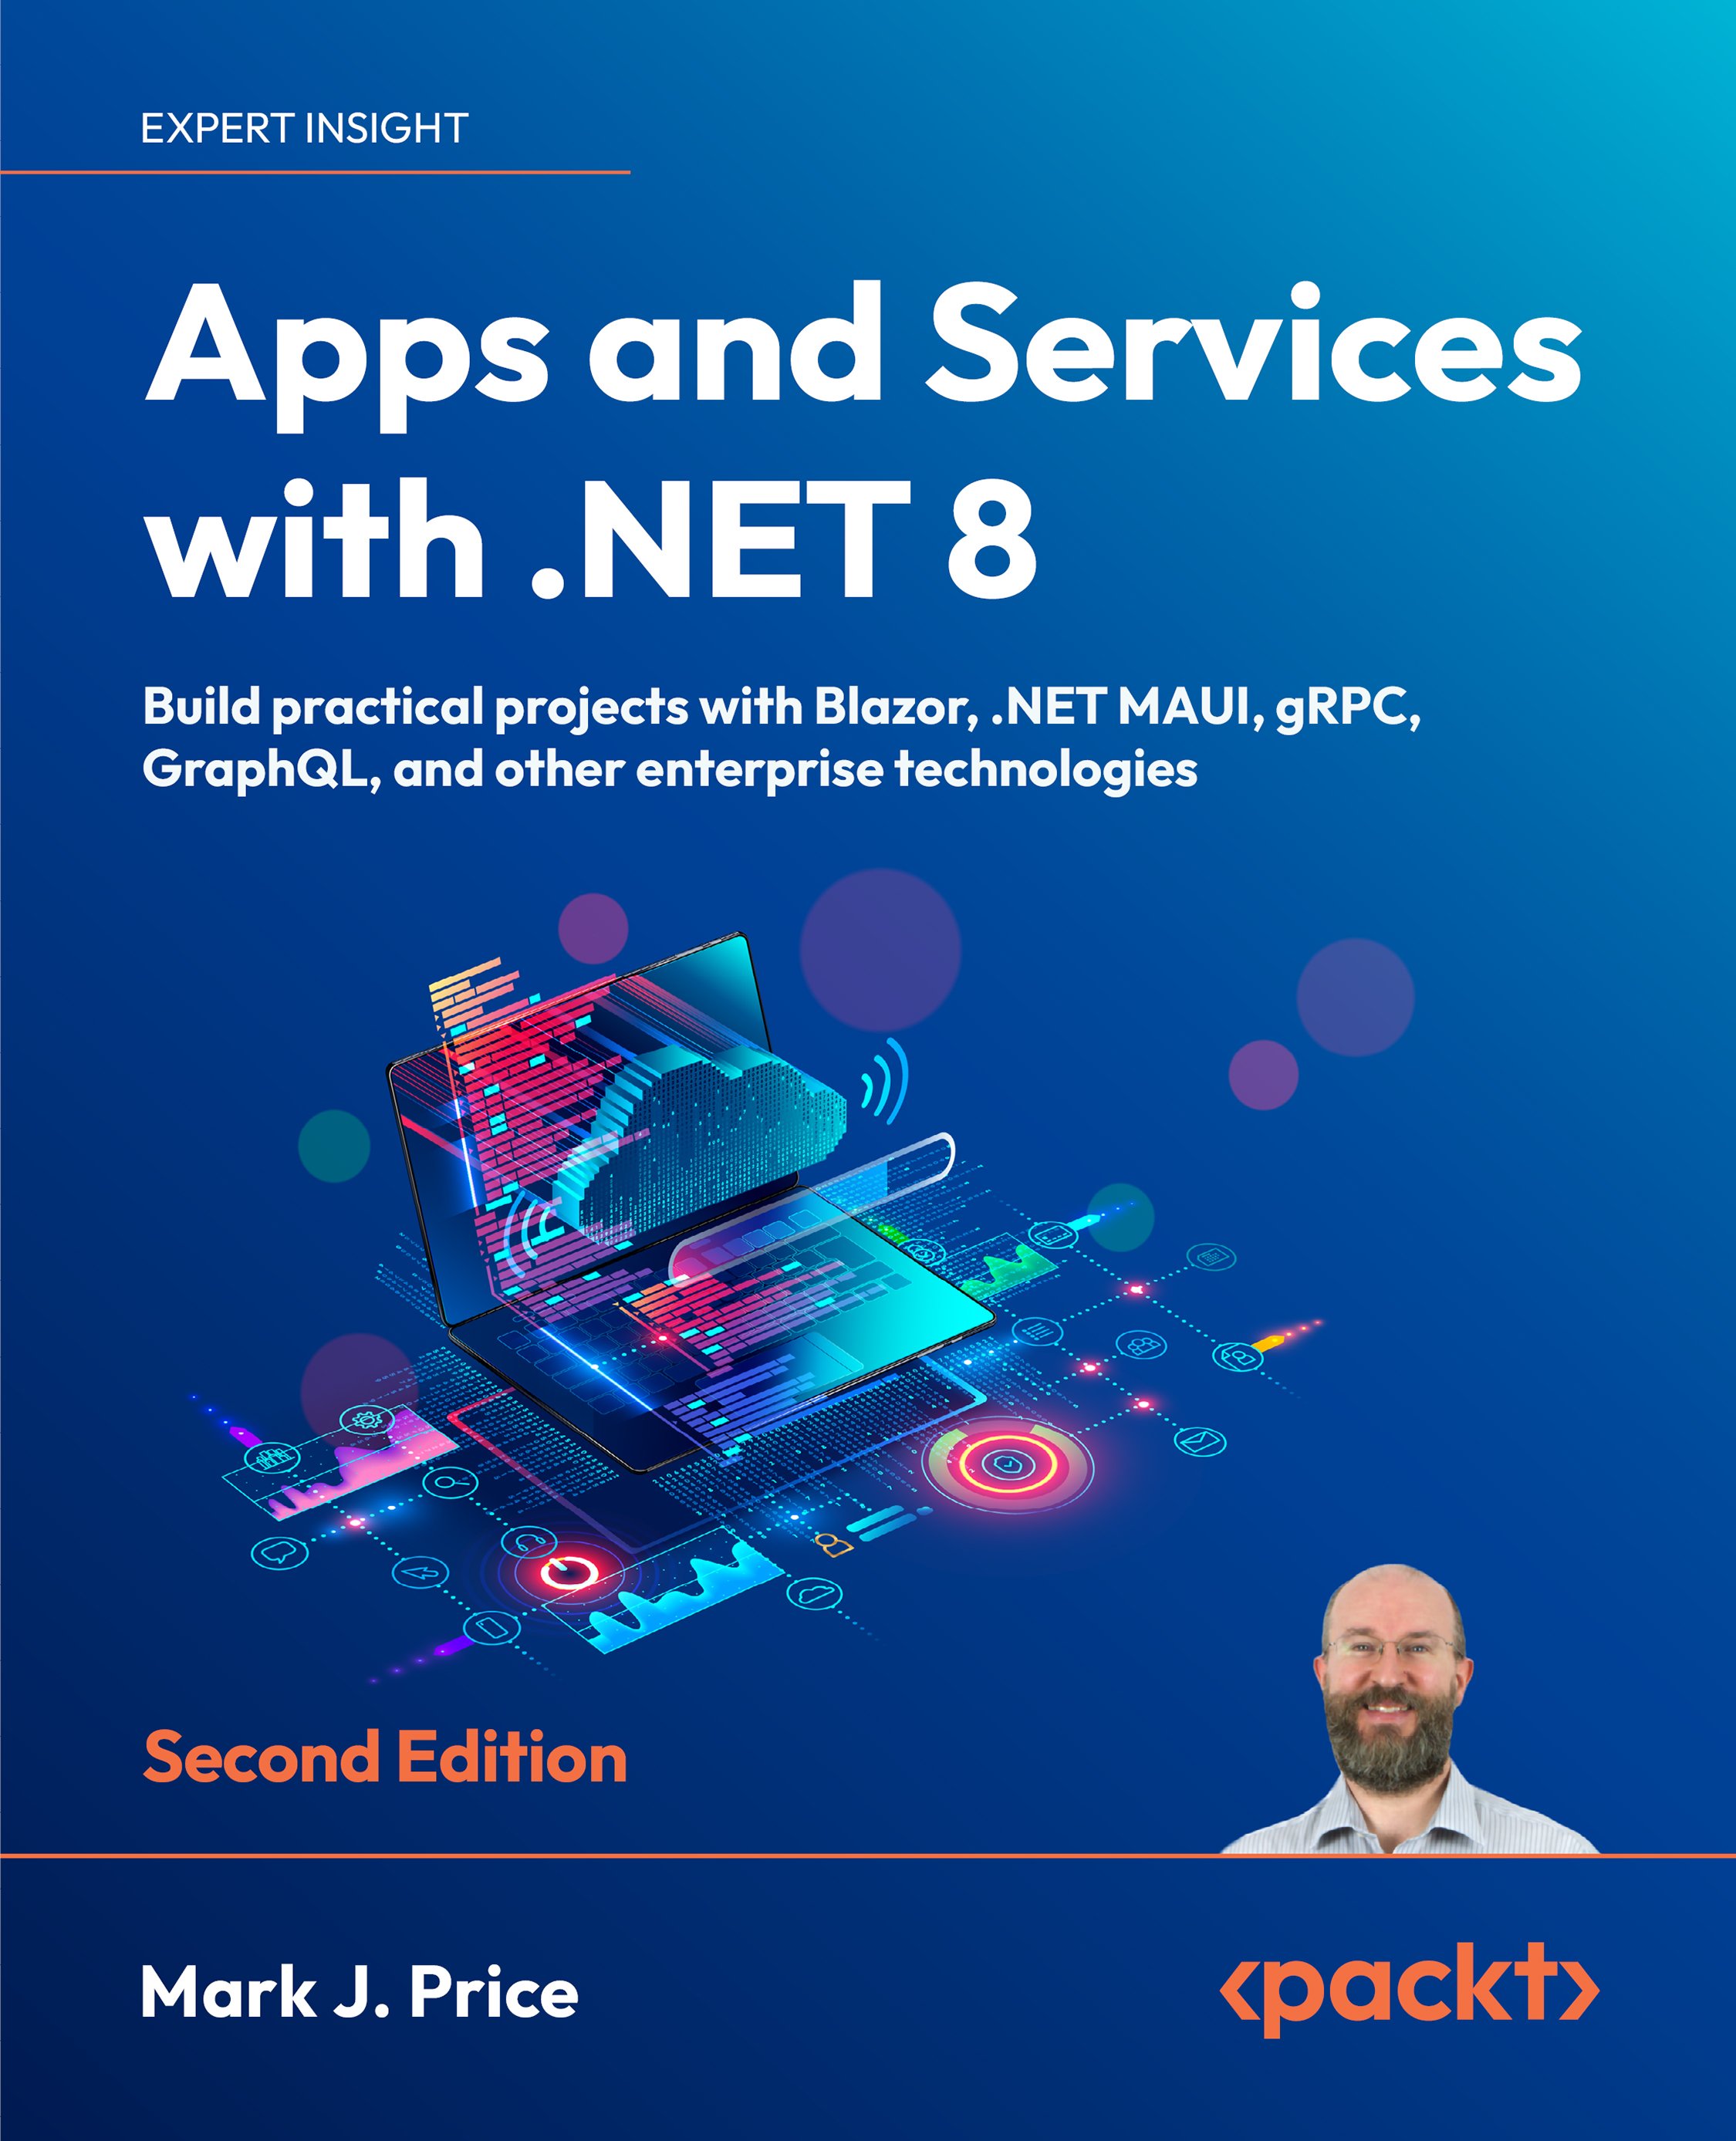 Apps and Services with .NET 8: Build practical projects with Blazor, .NET MAUI, gRPC, GraphQL, and other enterprise technologies, Second Edition